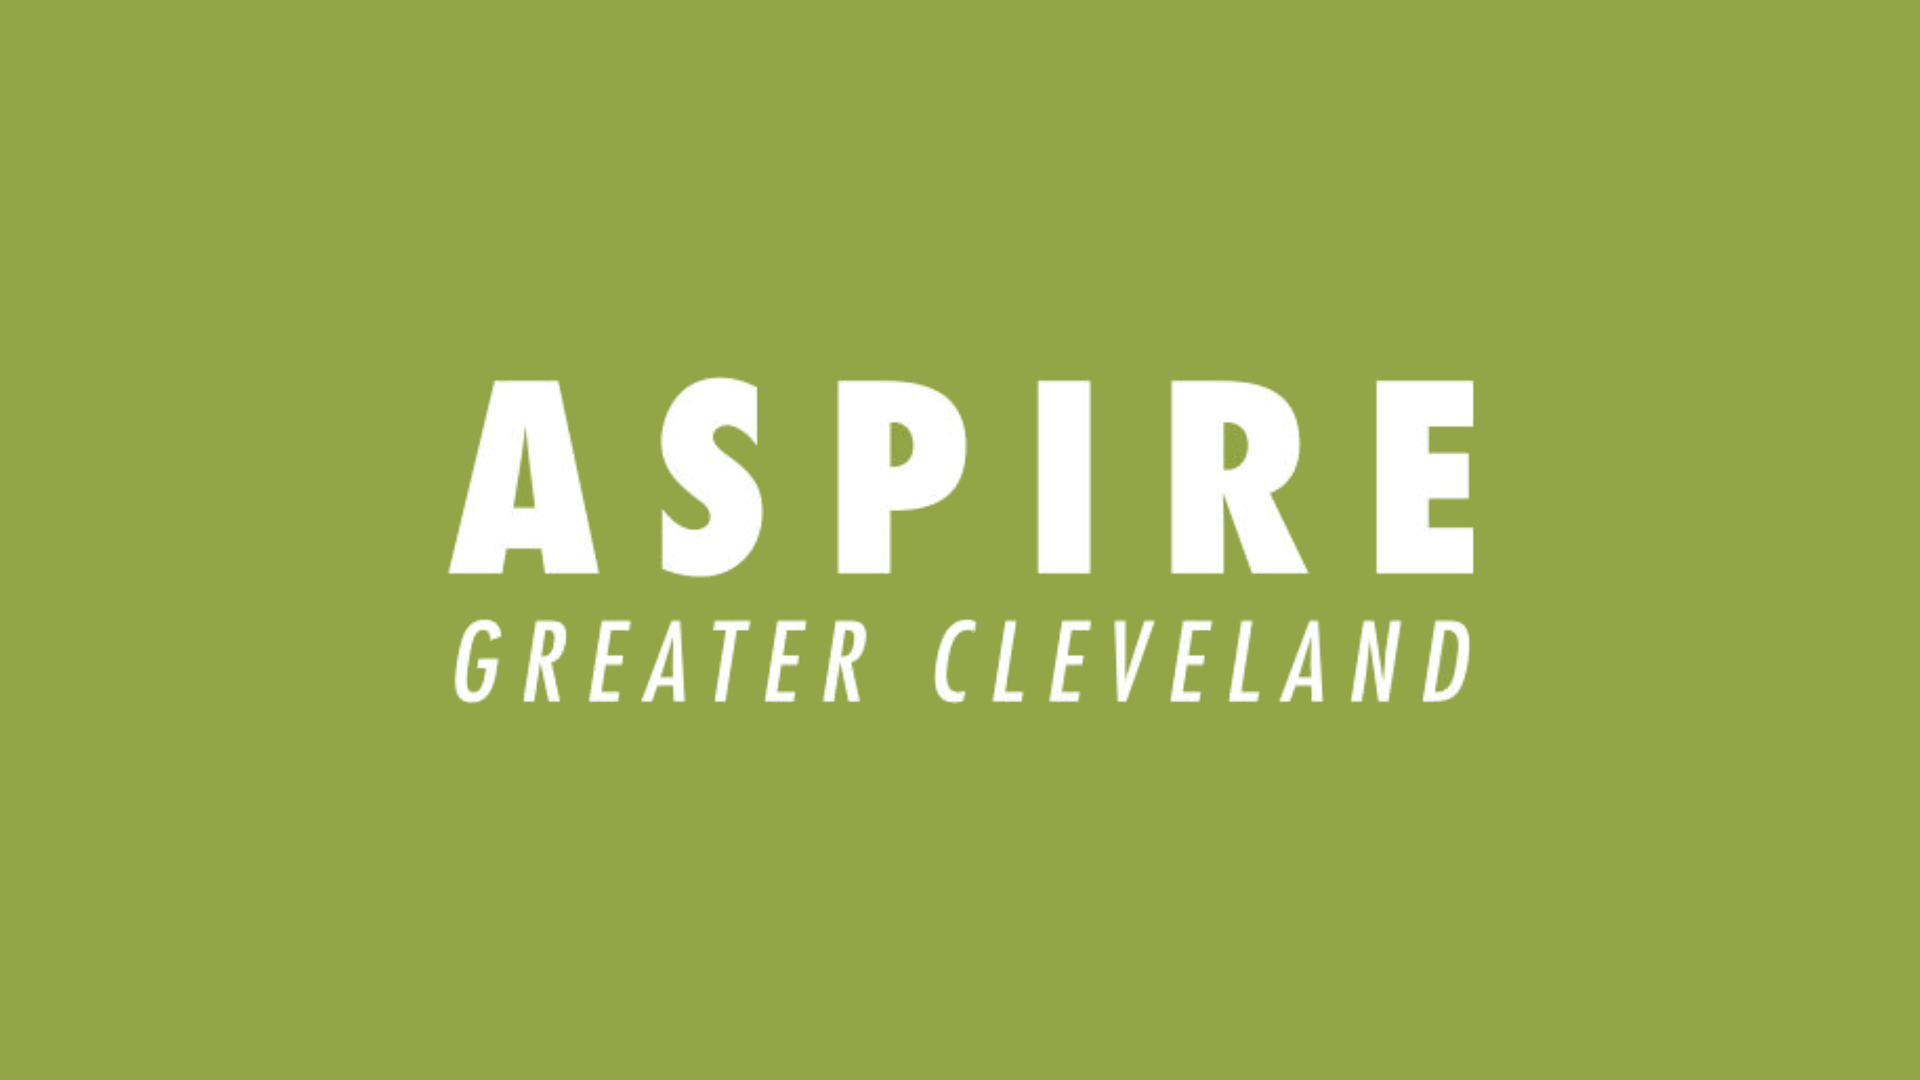 Asipre greater cleveland1920x1080